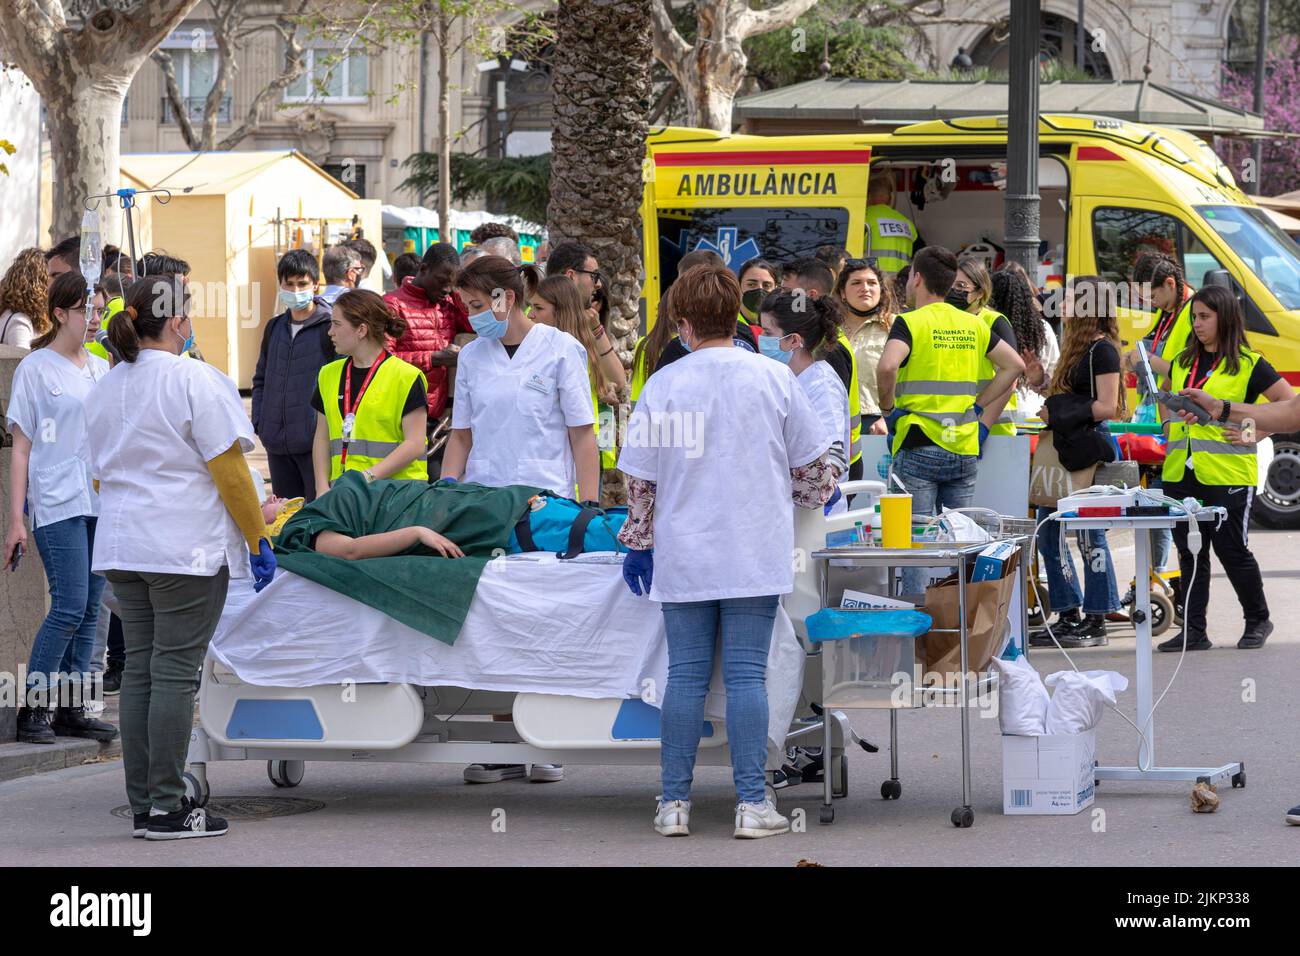 An ambulance car with the staff and a patient lying on the stretcher with people gathered around Stock Photo